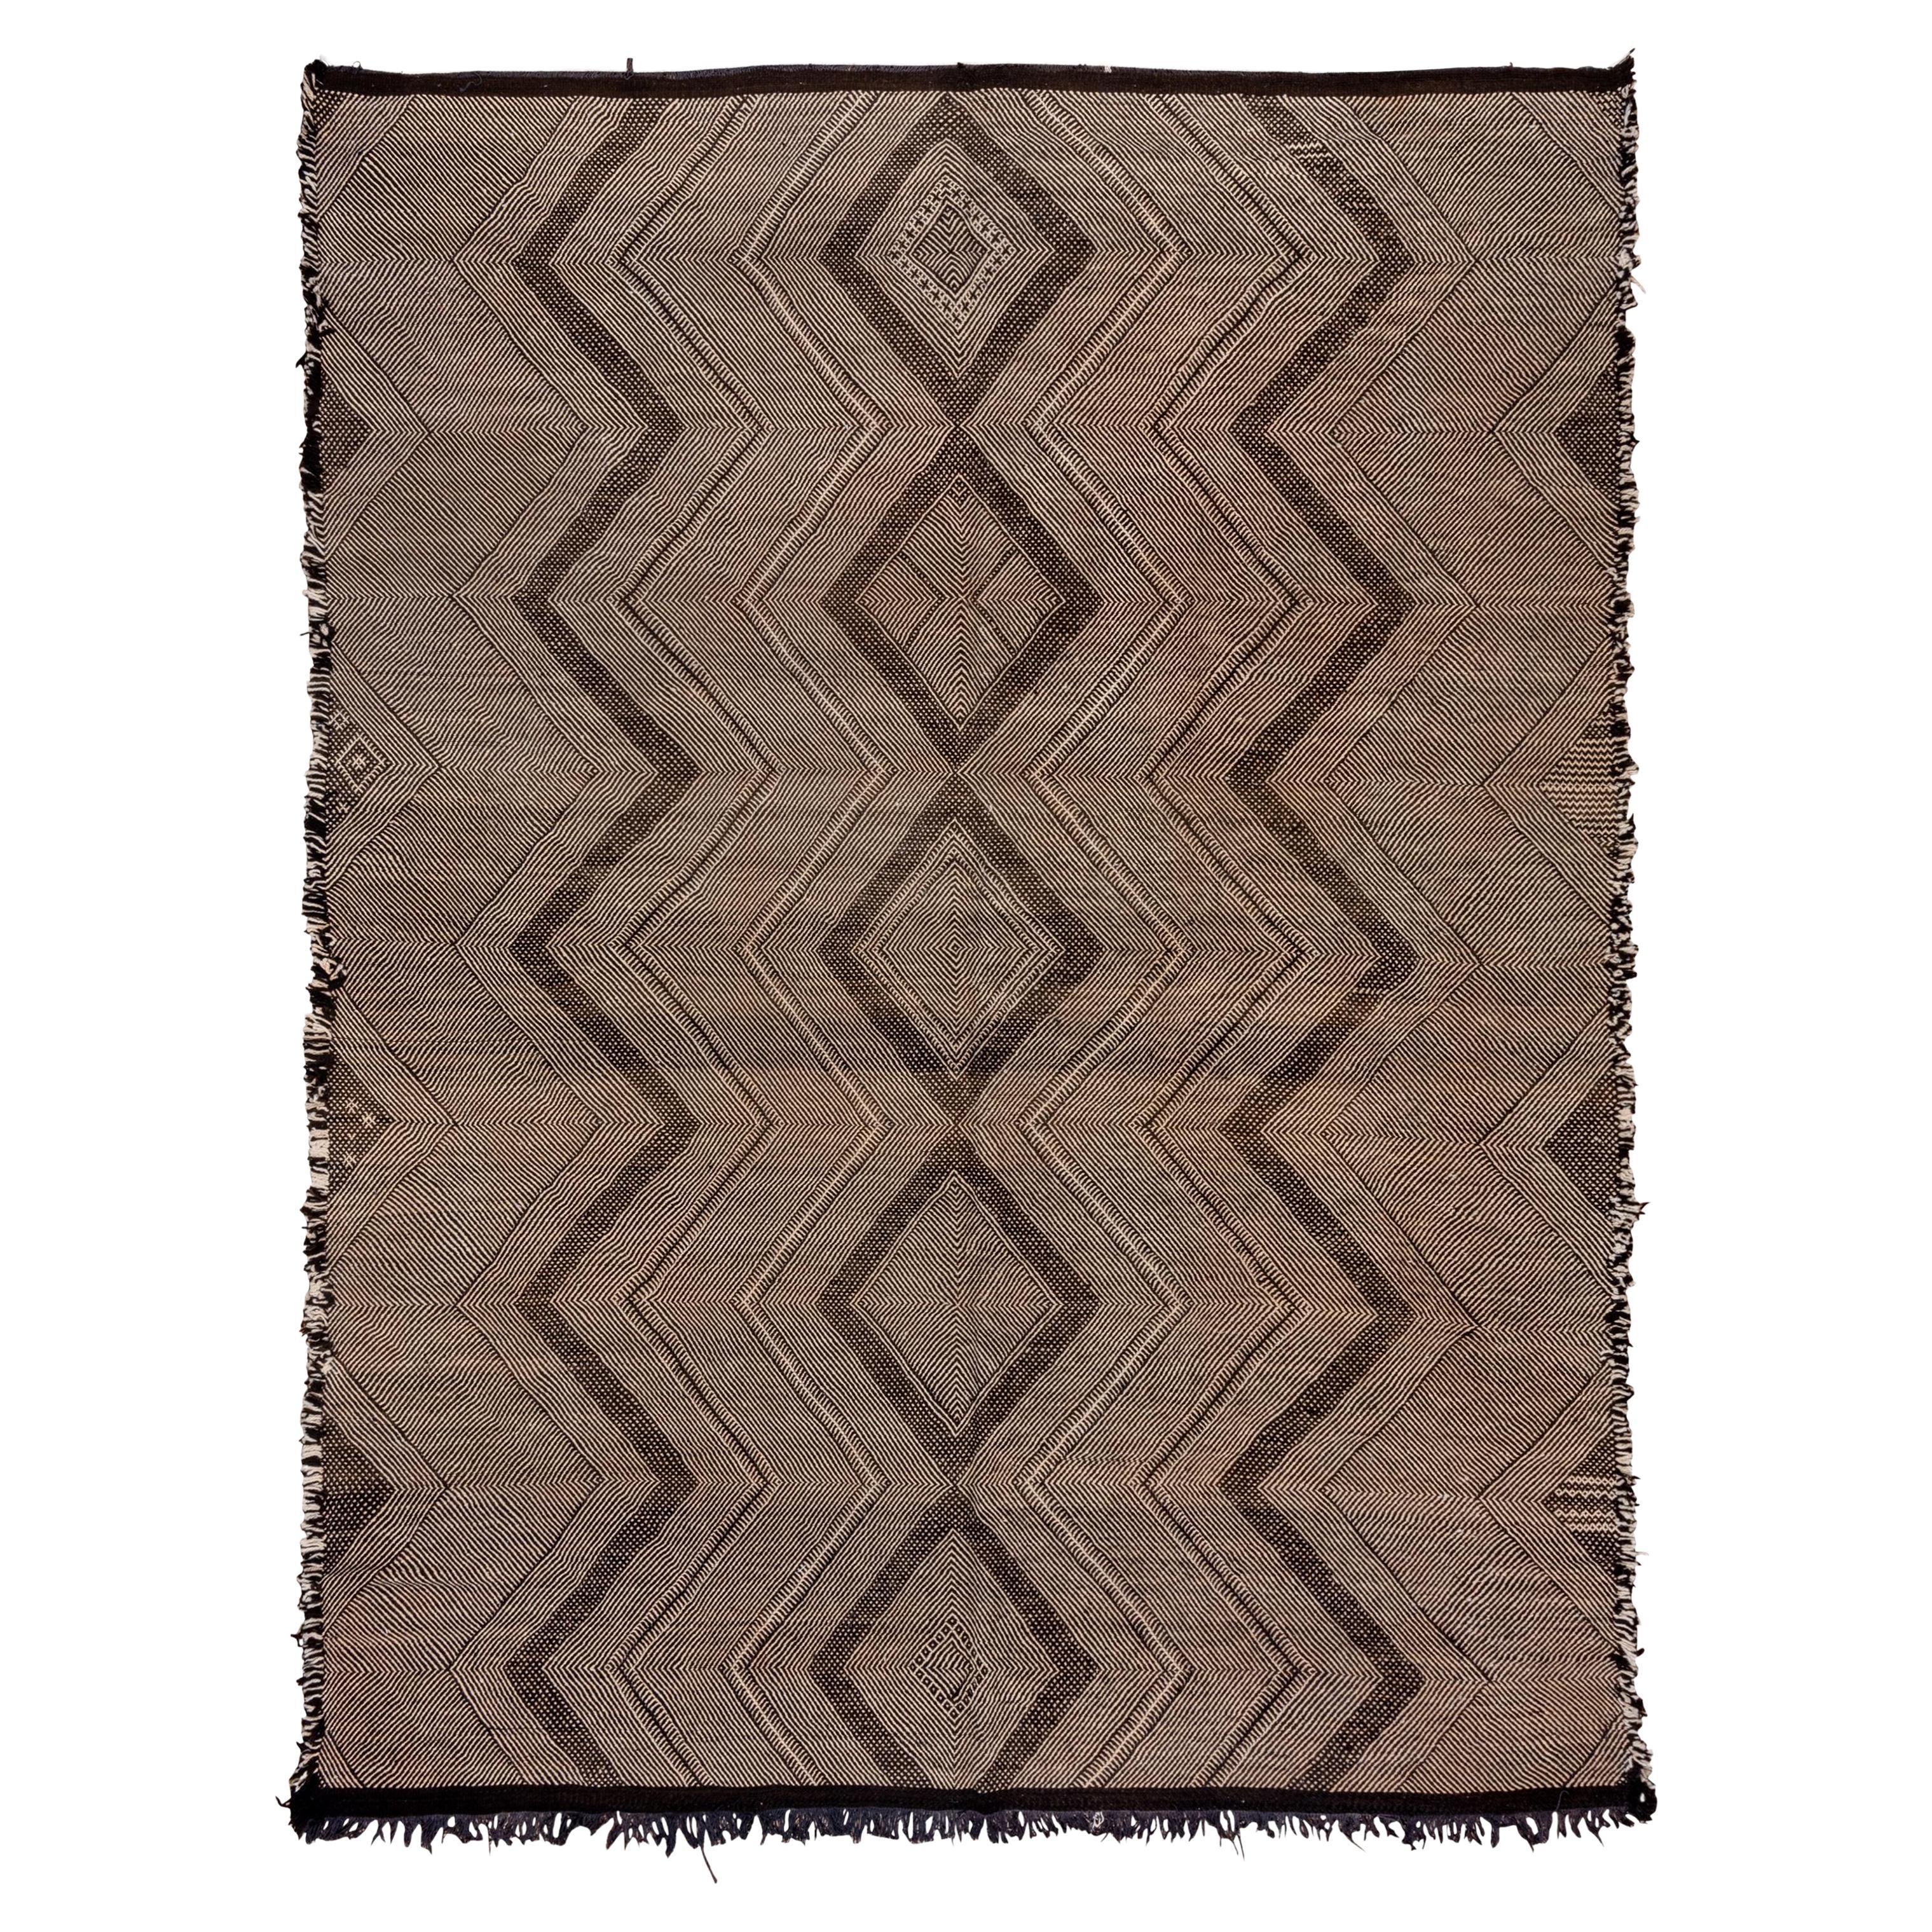 Large Moroccan Zanafi Kilim Rug, Soft Pile, Brown and Beige Tones For Sale